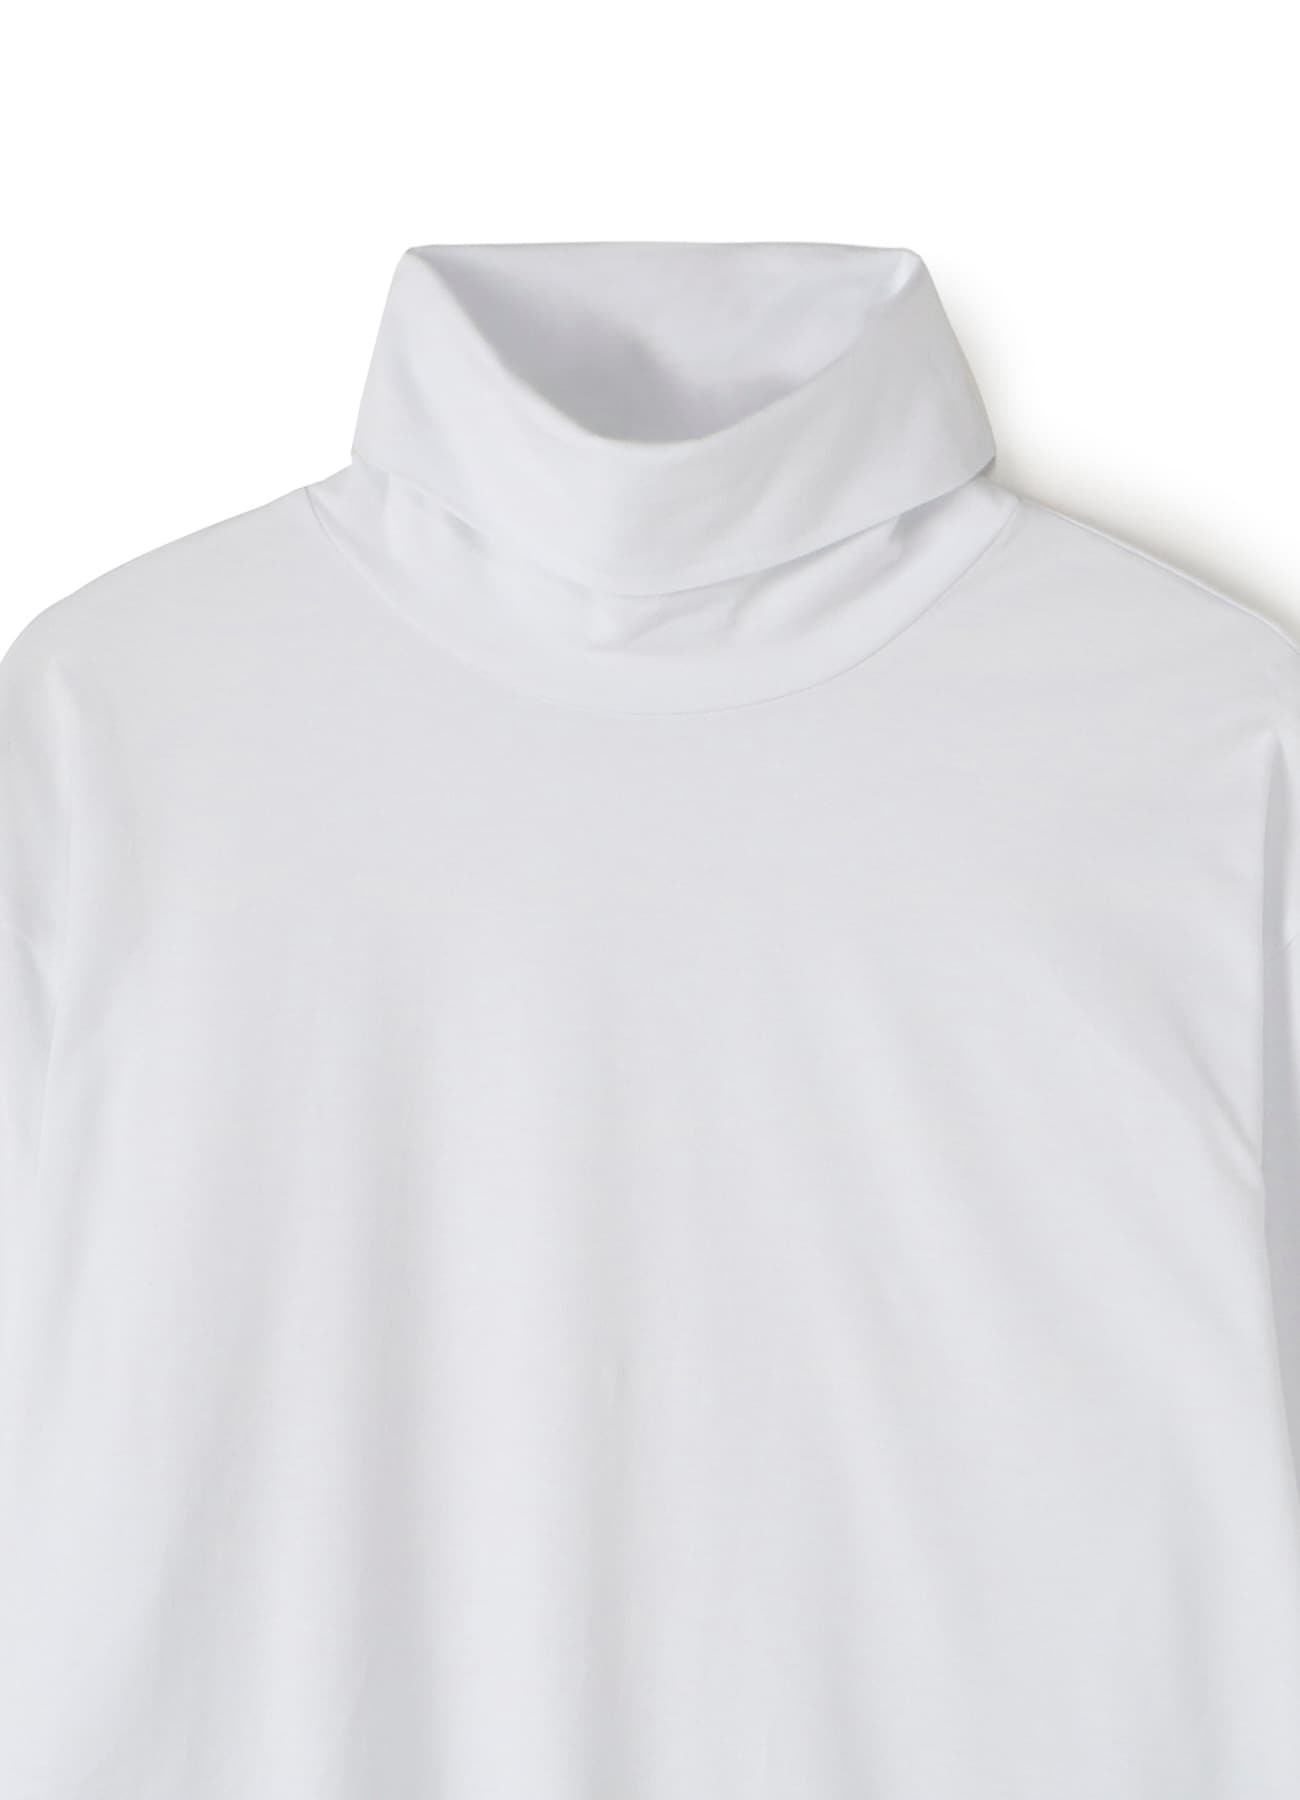 COTTON JERSEY TURTLE NECK T WITH RIGHT BUTTONS